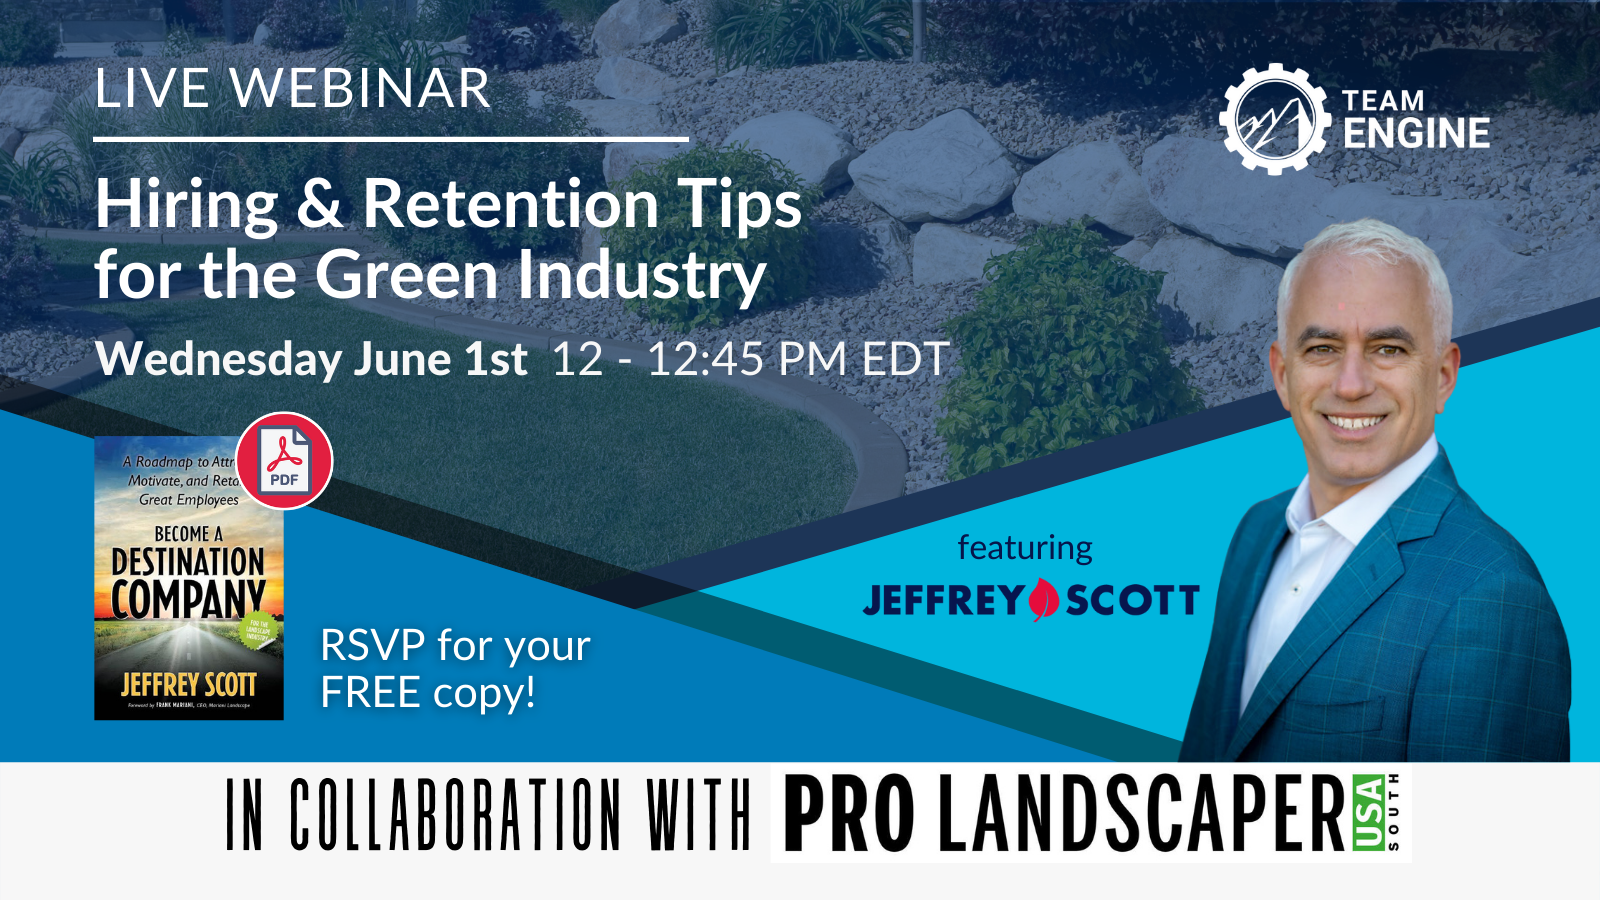 Hiring & Retention Tips for the Green Industry: A Live Webinar with Jeffrey Scott